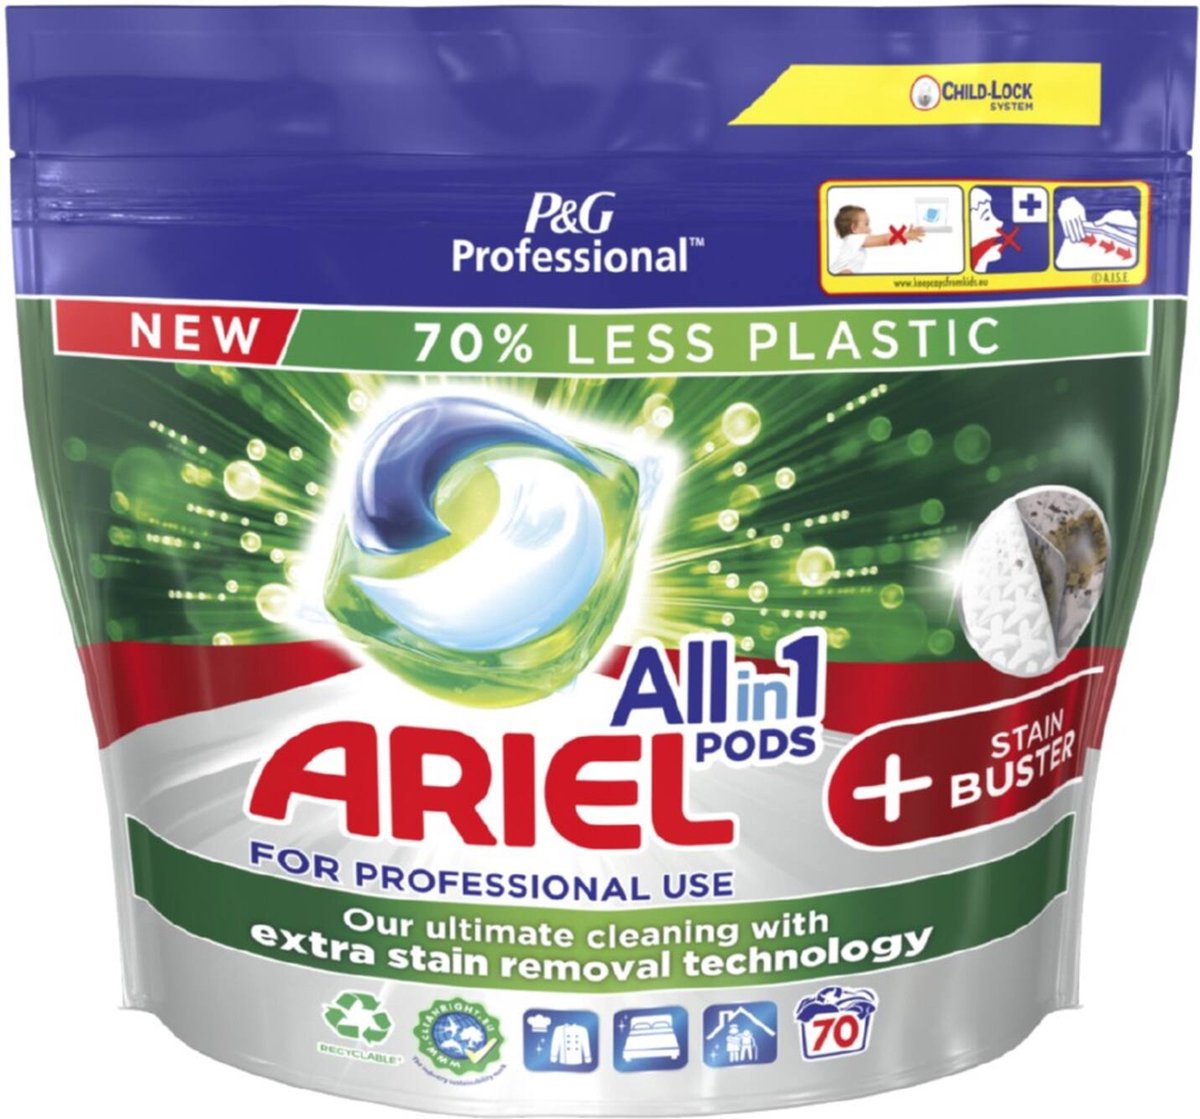 Ariel Professional All-in-1 pods + Stain Buster 70 stuks